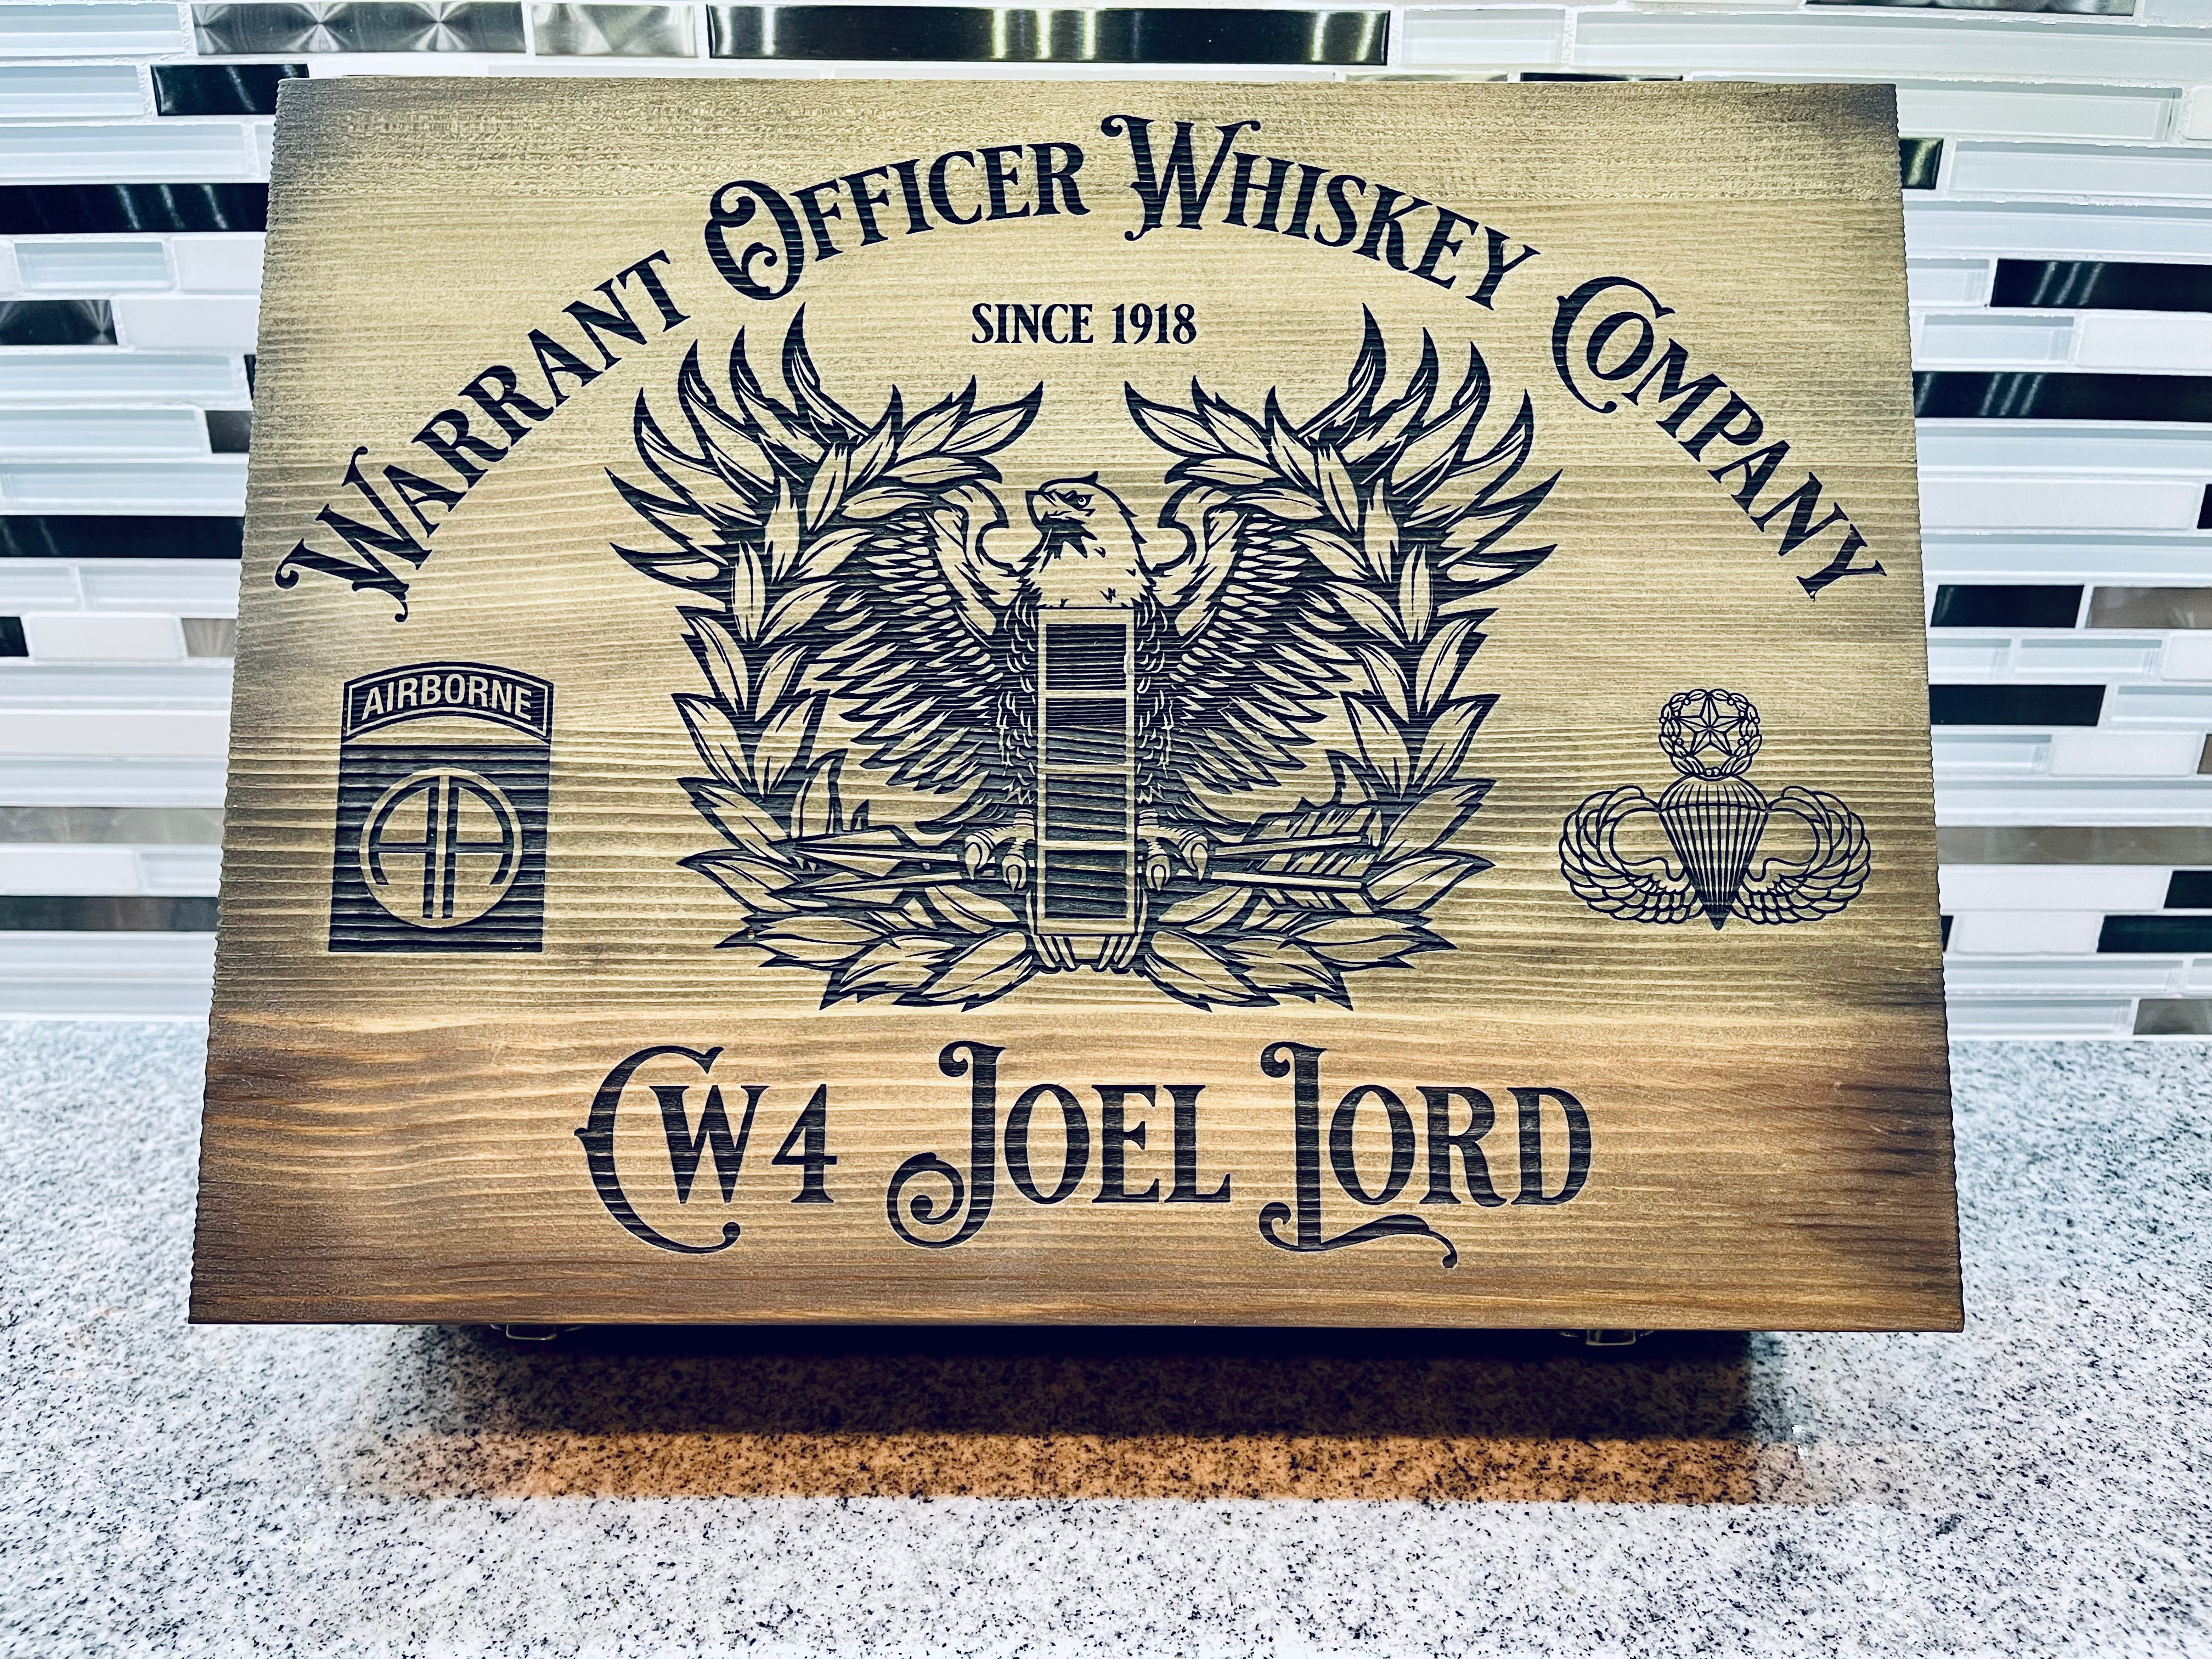 Crown Royal Whiskey Barrel Sign - Rustic Wooden Crate Whiskey Laser En –  Ben & Angies Gifts